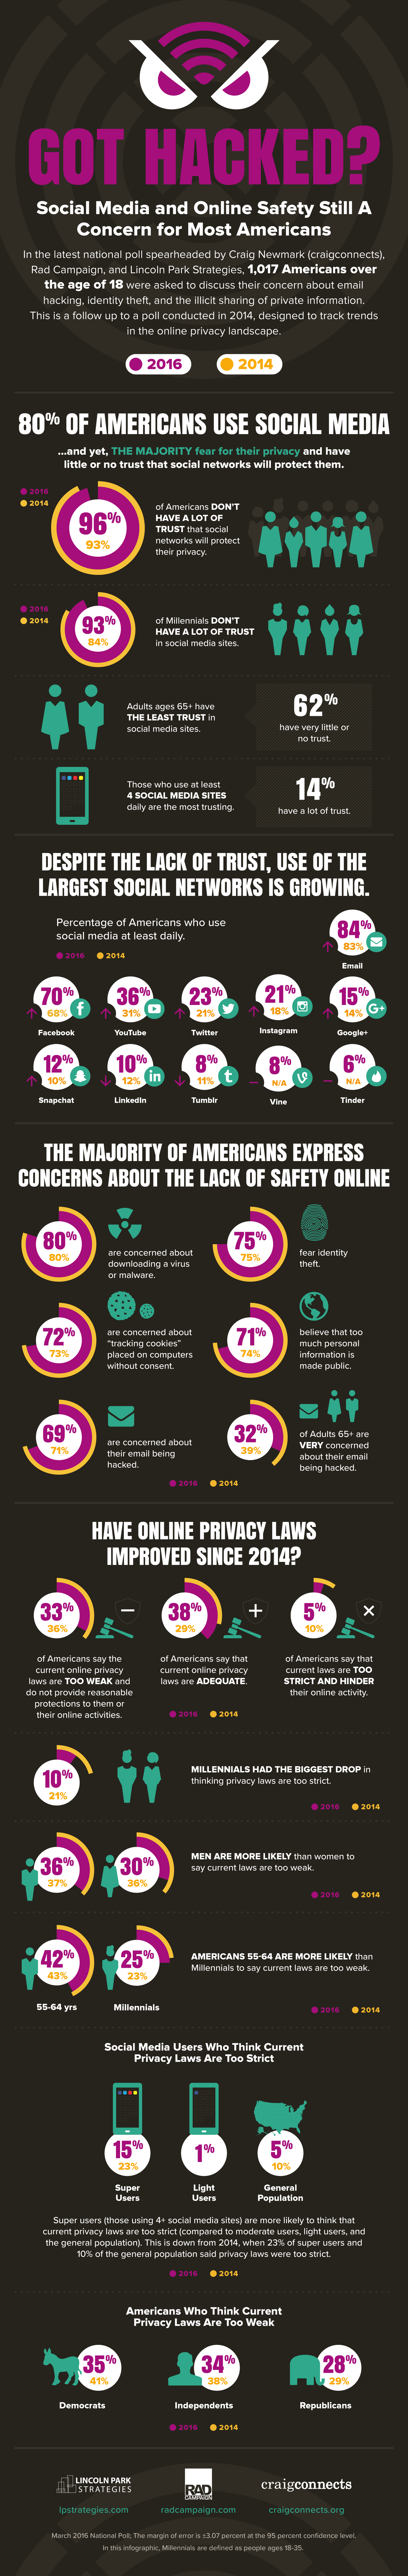 2016 Online Privacy Infographic Full